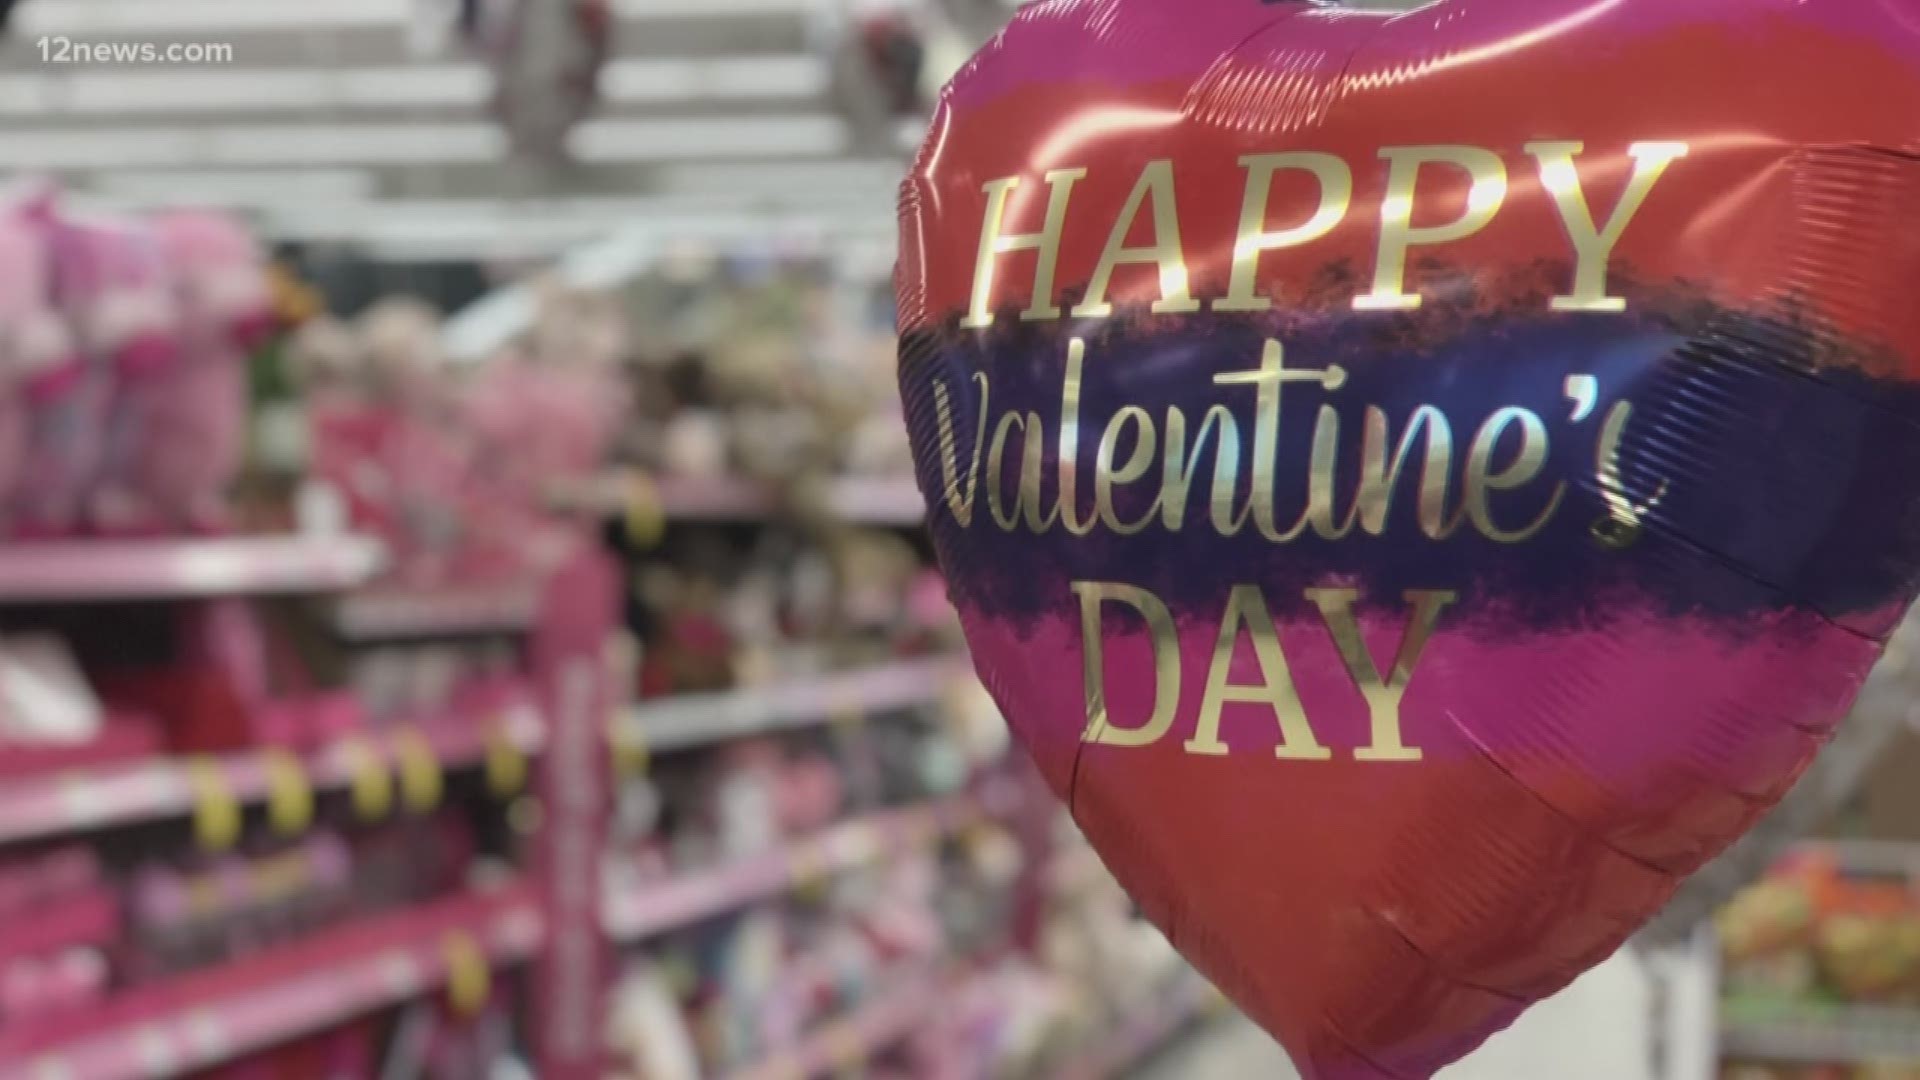 A Bankrate survey shows men have higher expectations for Valentine's Day gifting than women, not only giving more but expecting more in return.